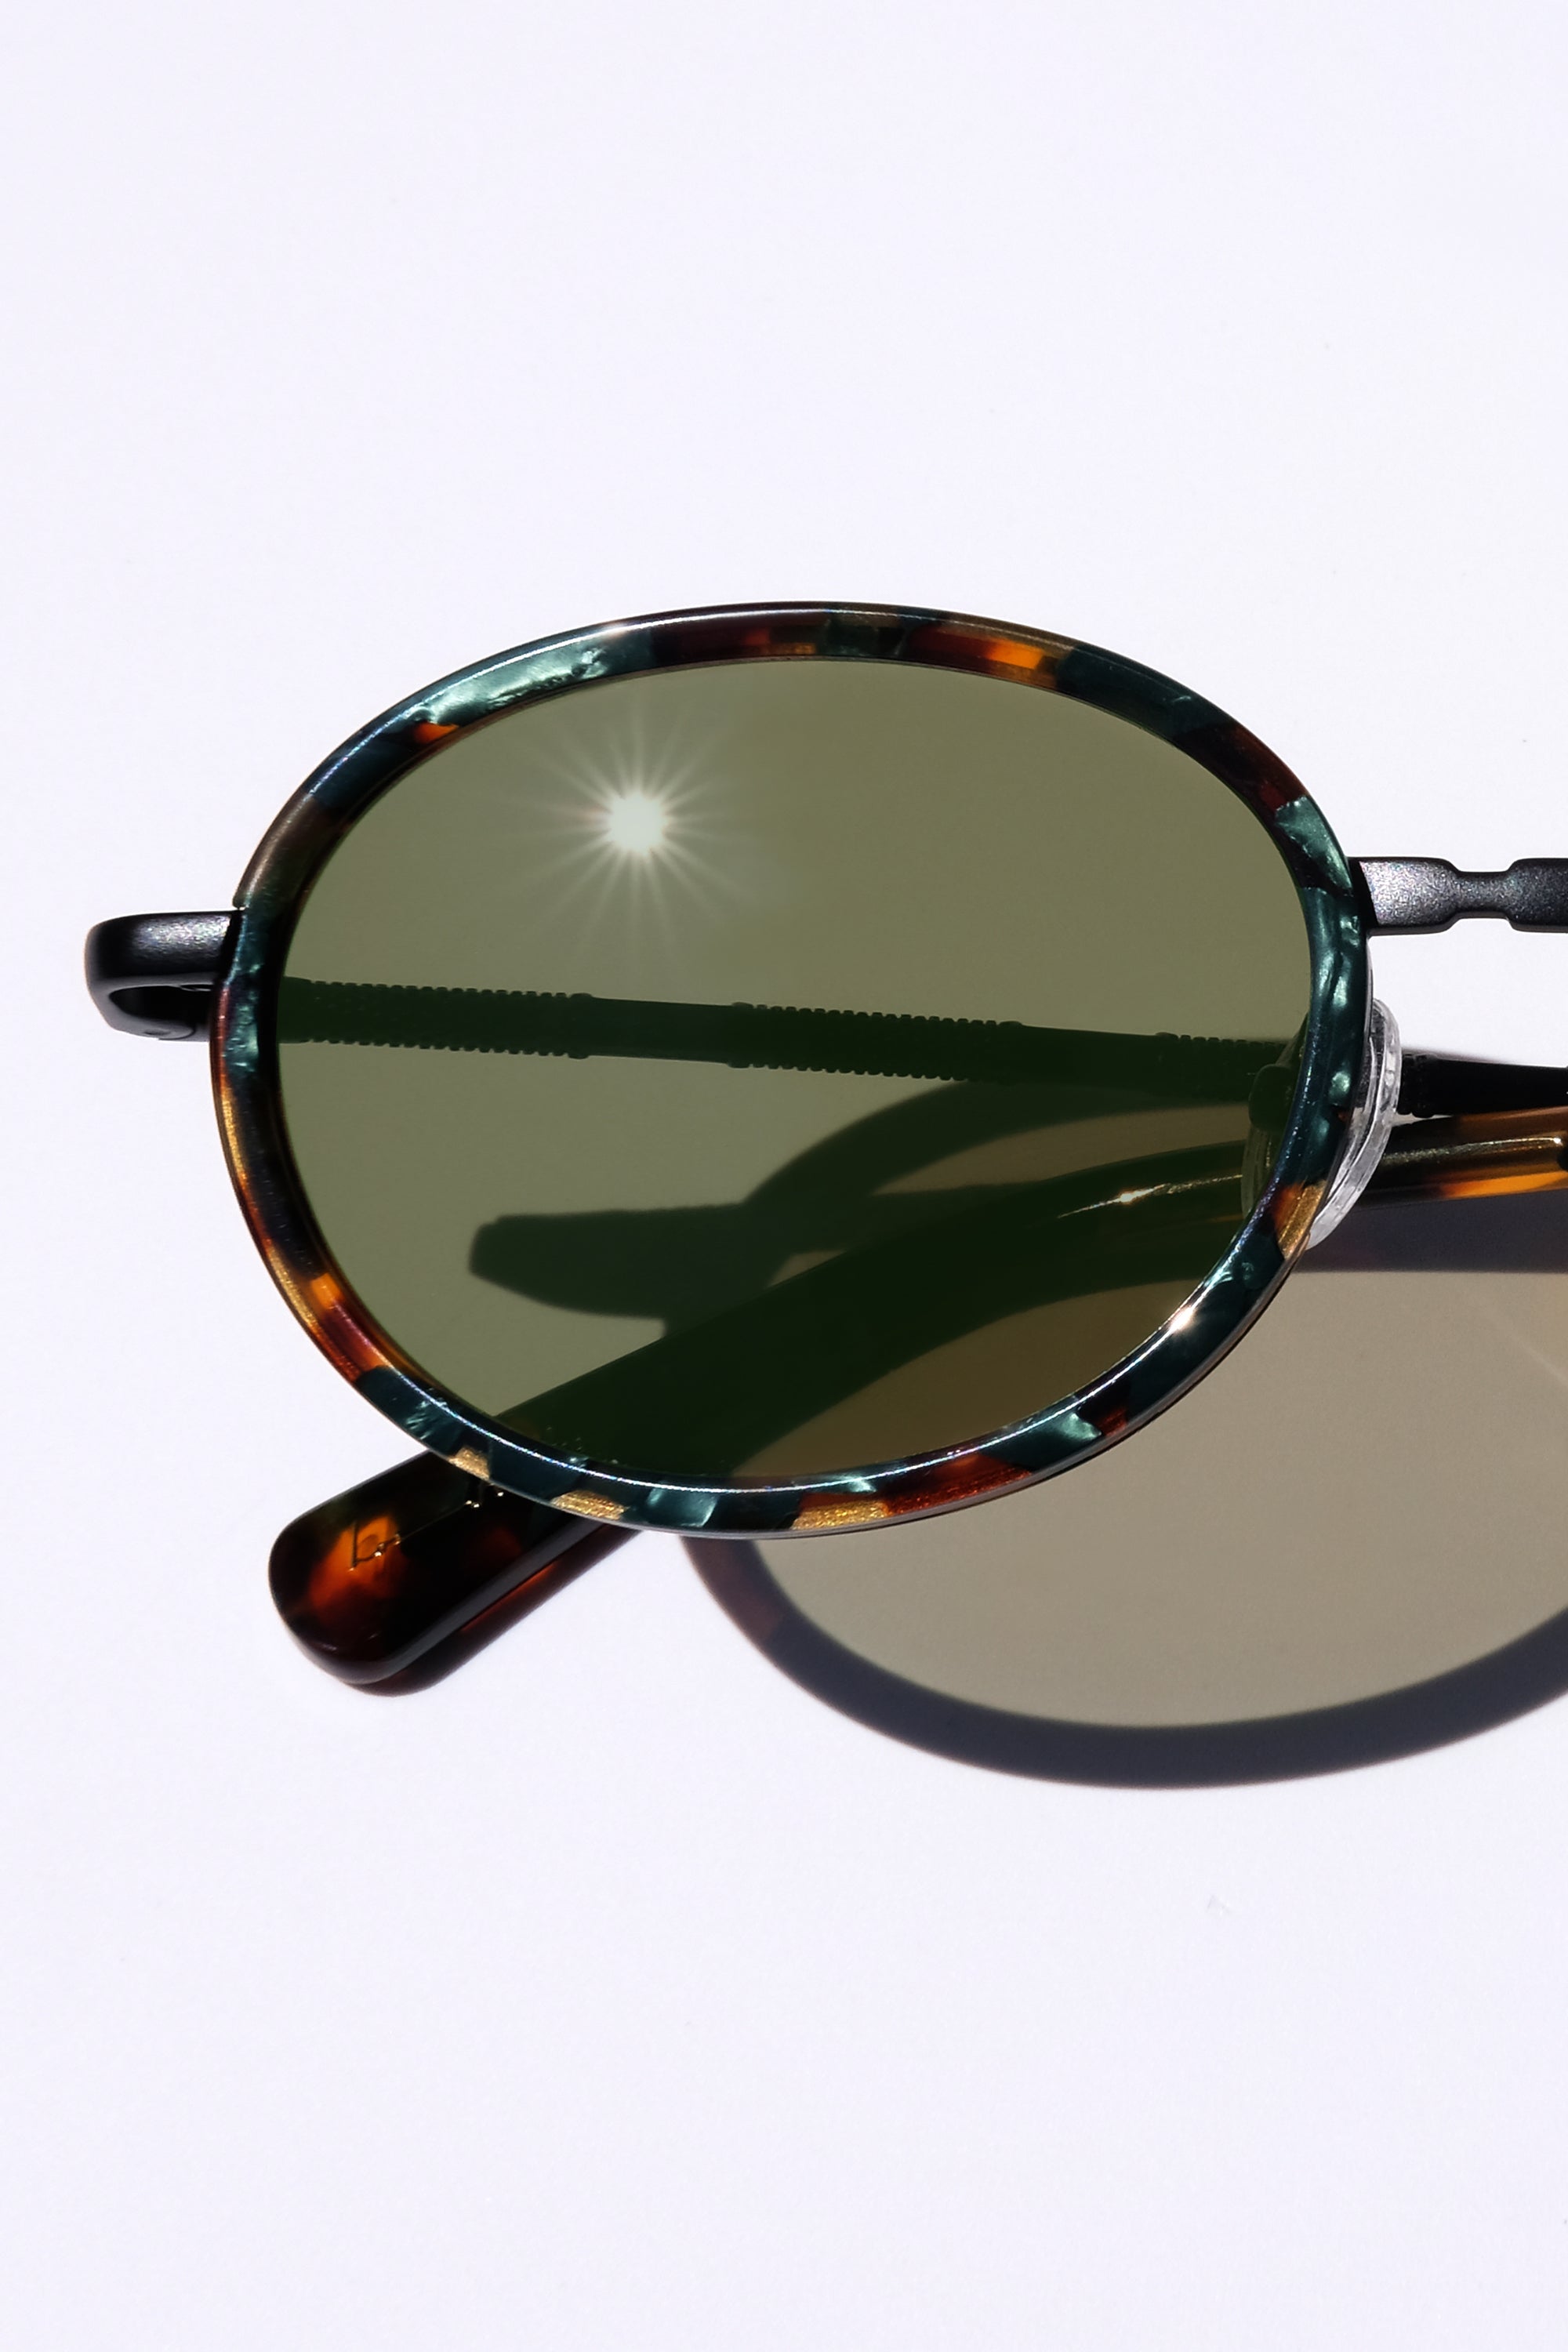 Unisex Glasses, Woman Owned Small business, Classic Round Sunglasses, Classic Oval Metal Glasses, Matte Black Accessories, Art Deco Inspired, Galapagos Island, Wanderlust inspo, marine iguana, eclectic fashion, luxury sunglasses, celebrity style, 